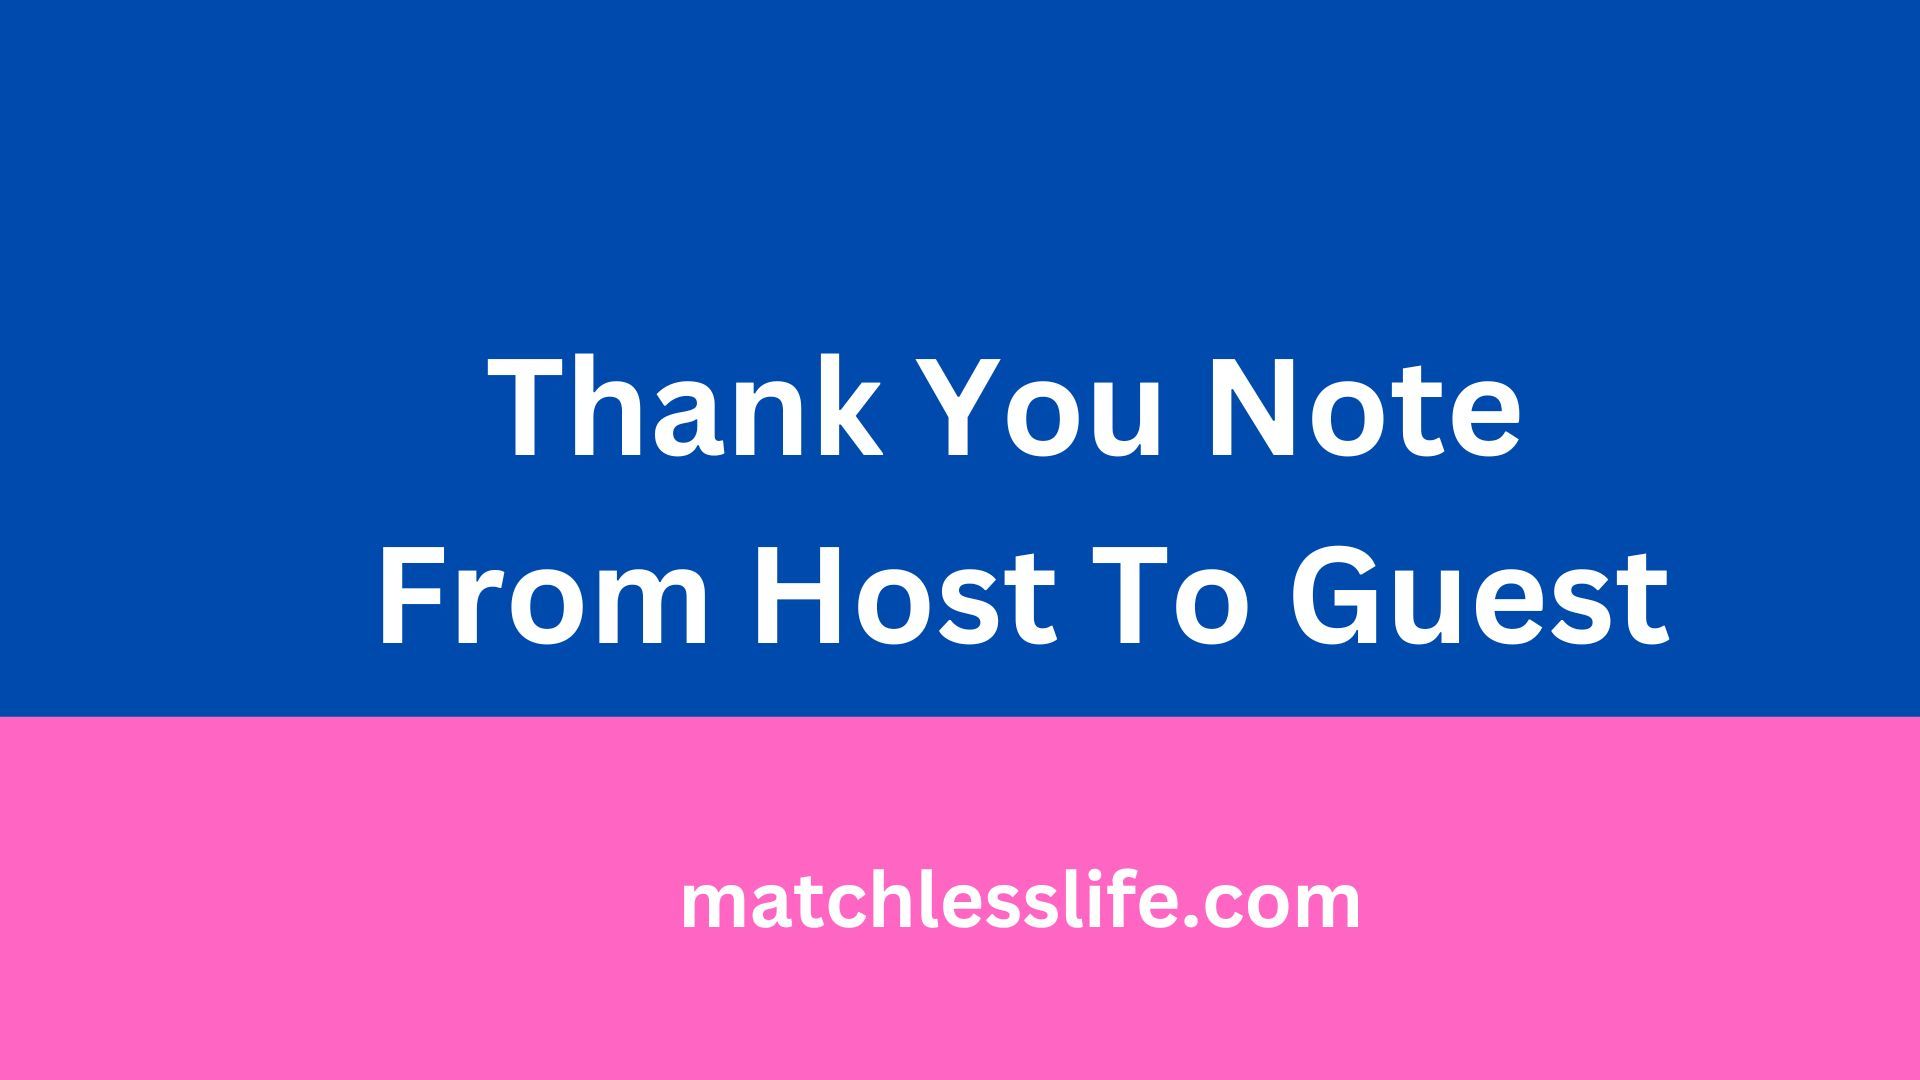 Thank You Note From Host To Guest